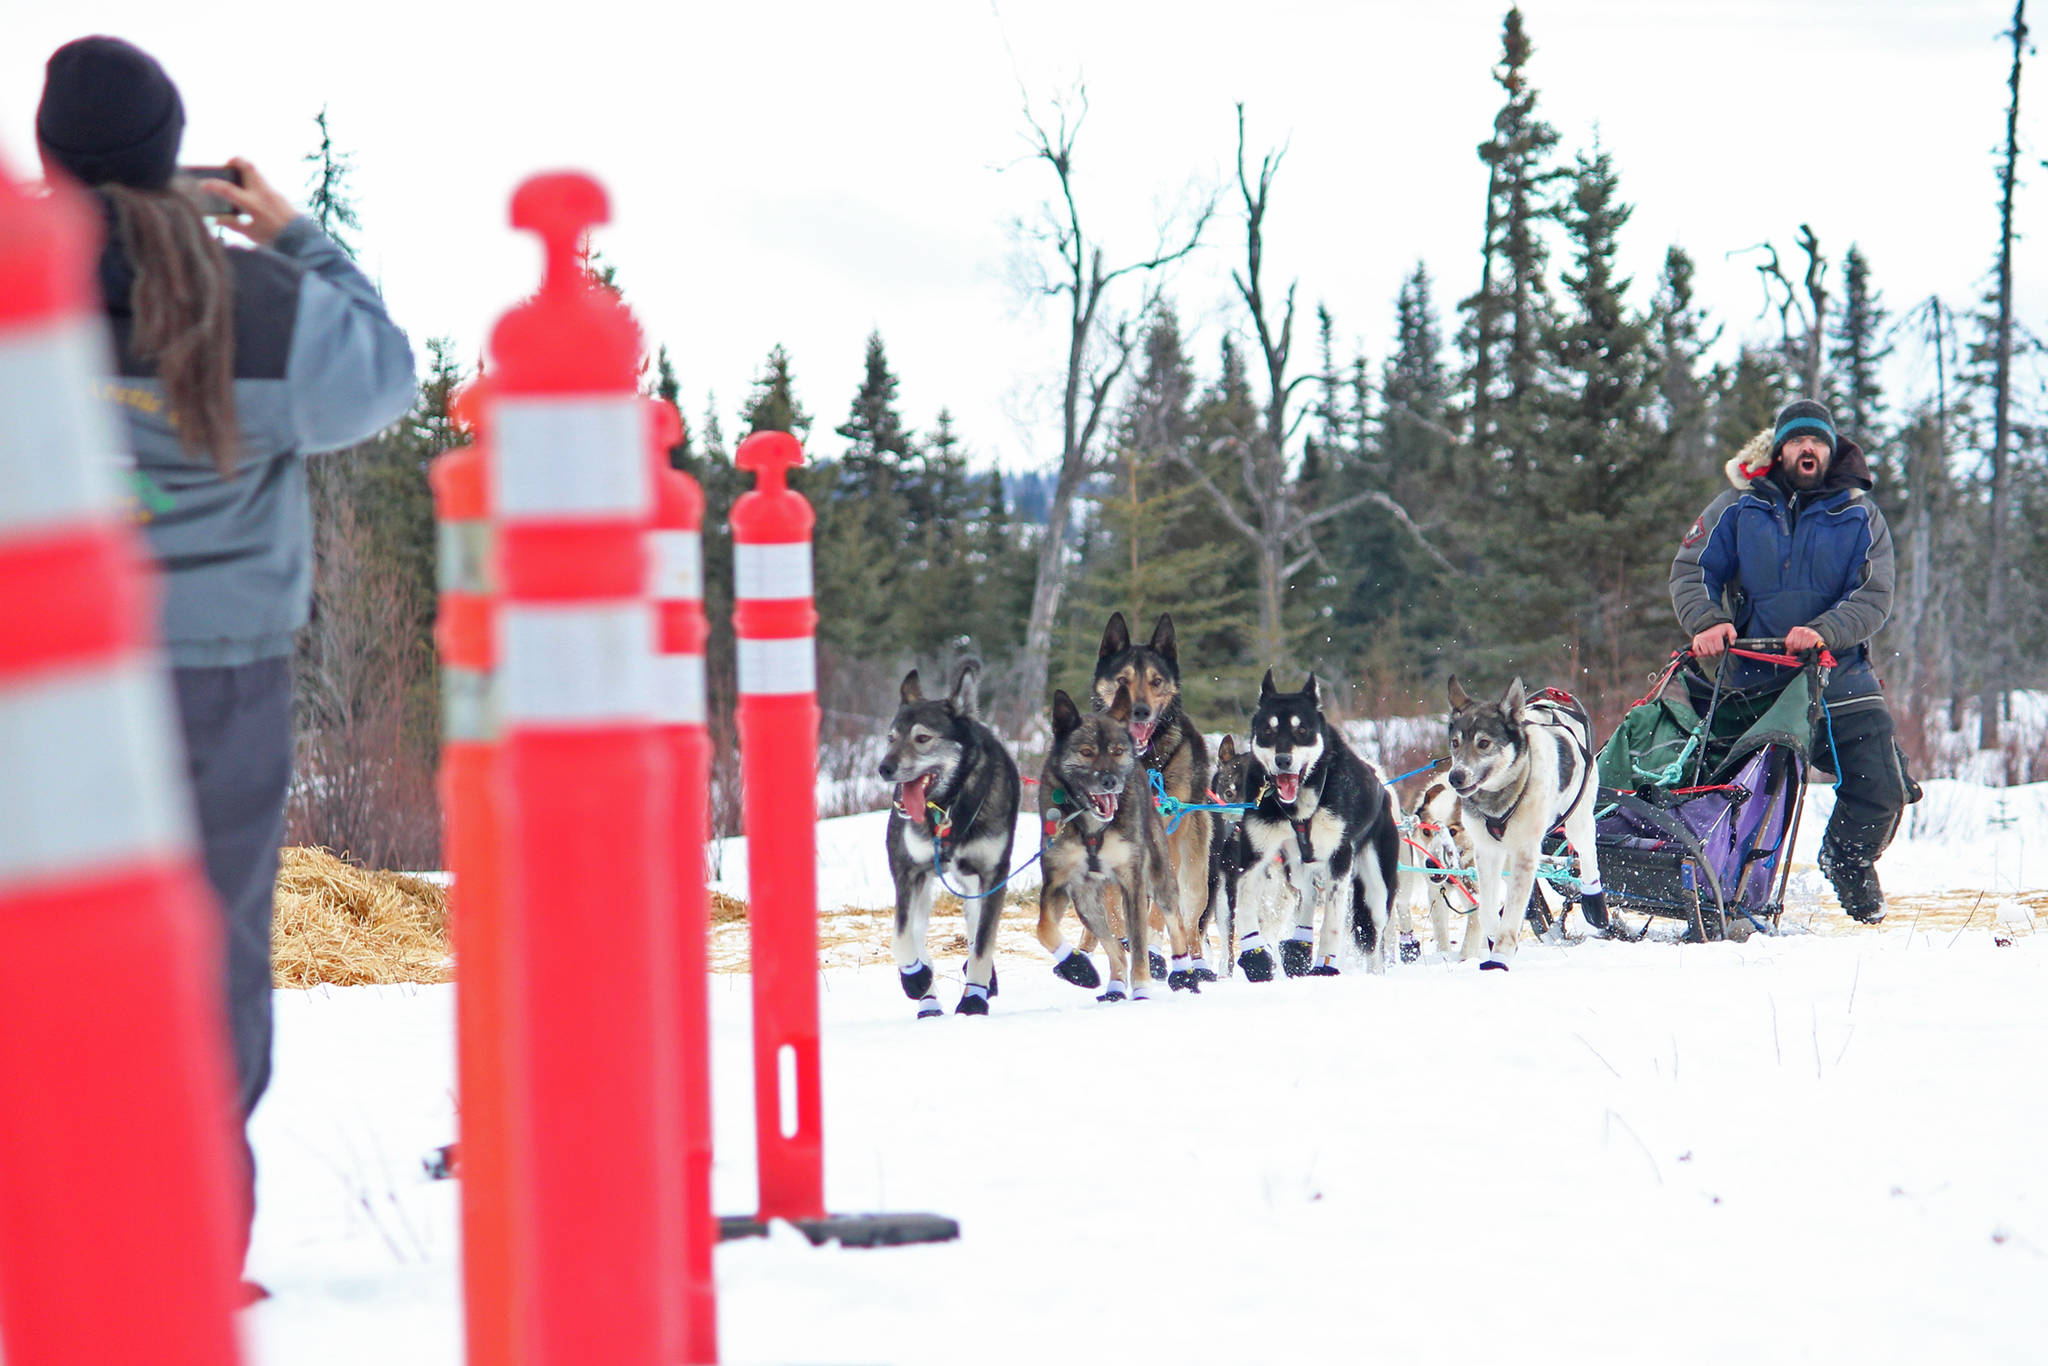 Musher Cim Smyth directs his dogs into the lane marking the finsih line of this year’s Tustumena 200 Sled Dog Race on Sunday, Jan. 27, 2019 at Freddie’s Roadhouse near Ninilchik, Alaska. Smyth, who has won the T200 several times, came in second this year. (Photo by Megan Pacer/Homer News)